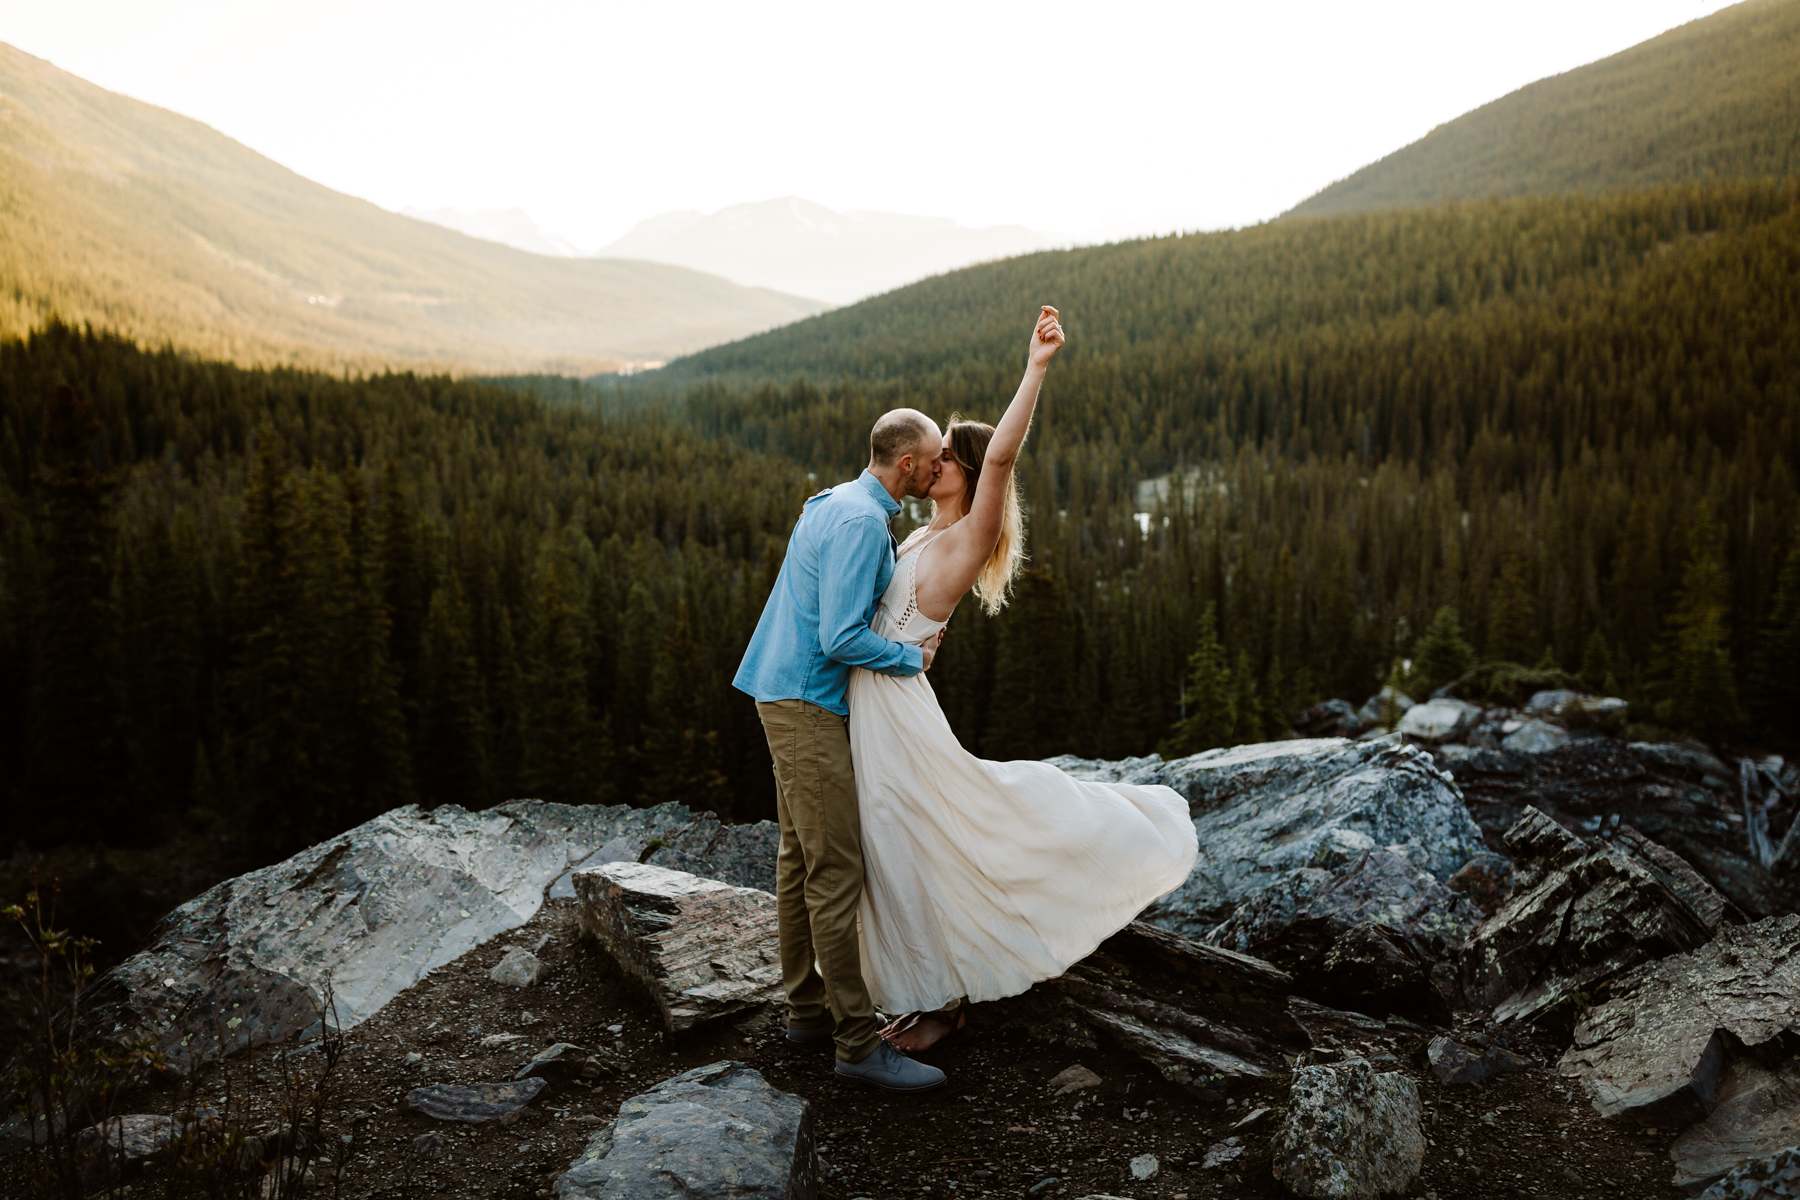 Adventure Elopement Photographers at Moraine Lake with an Outdoorsy Couple in the Mountains